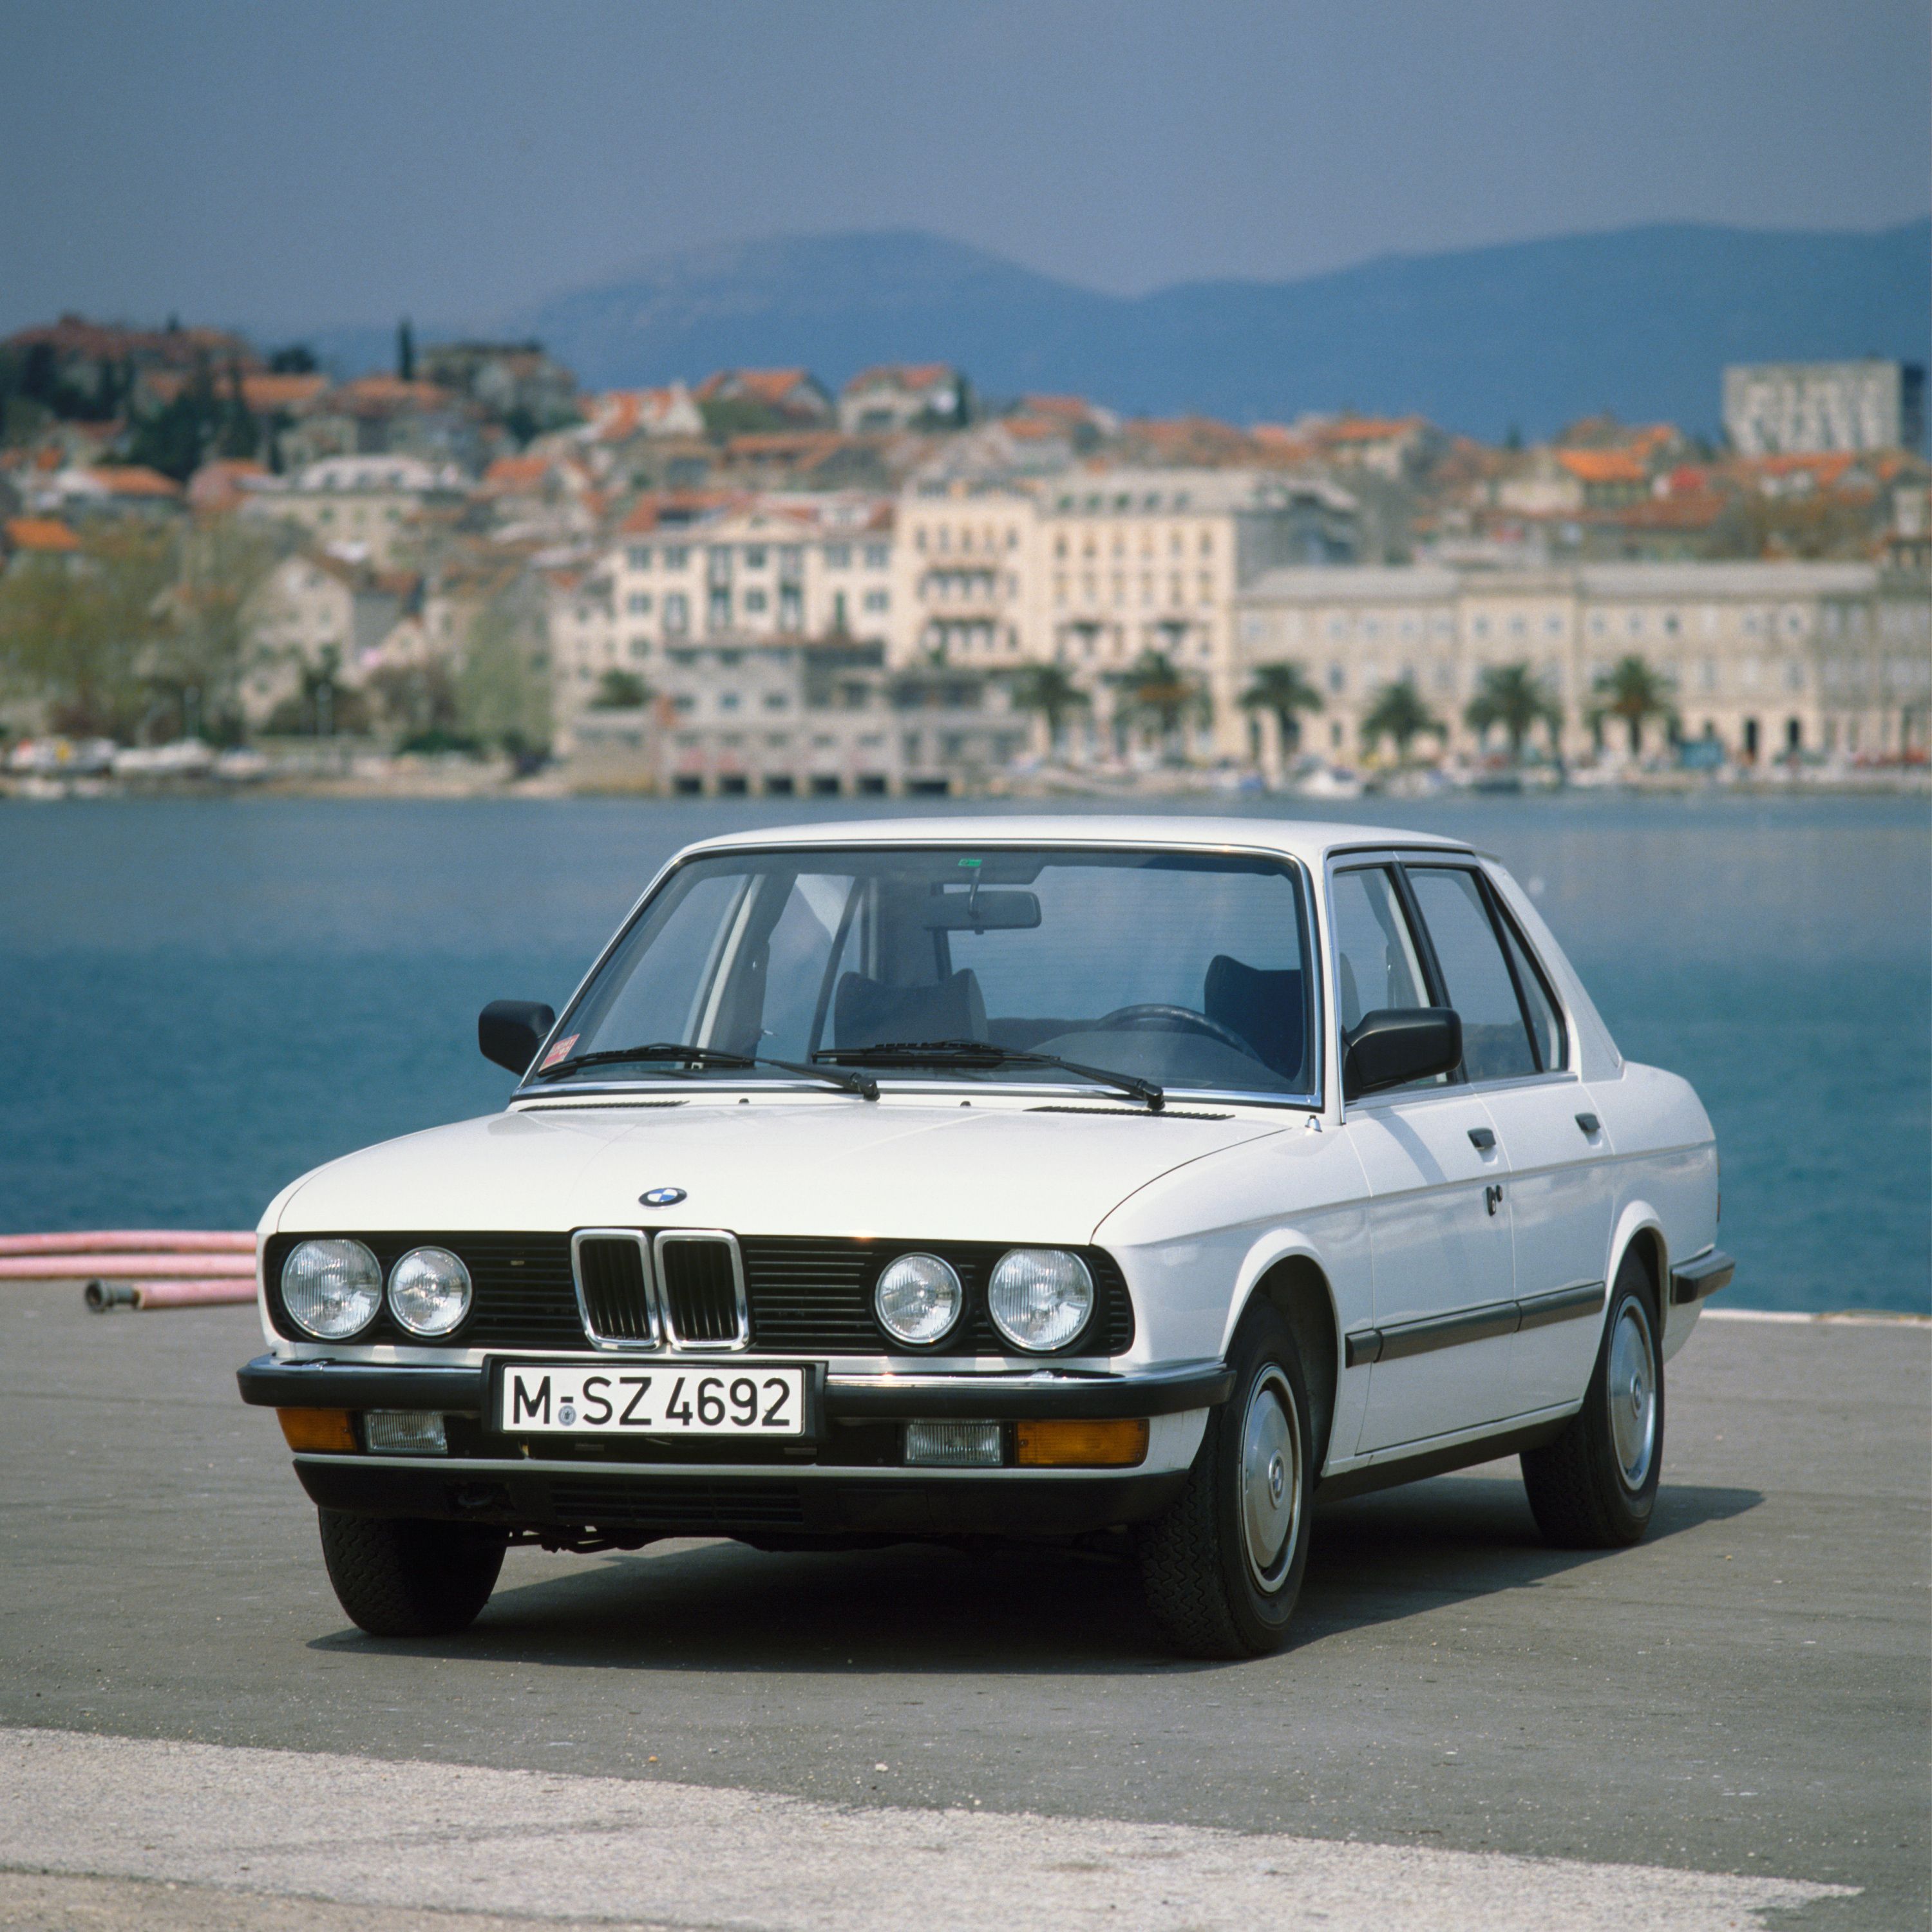 An overview of the BMW 5 series